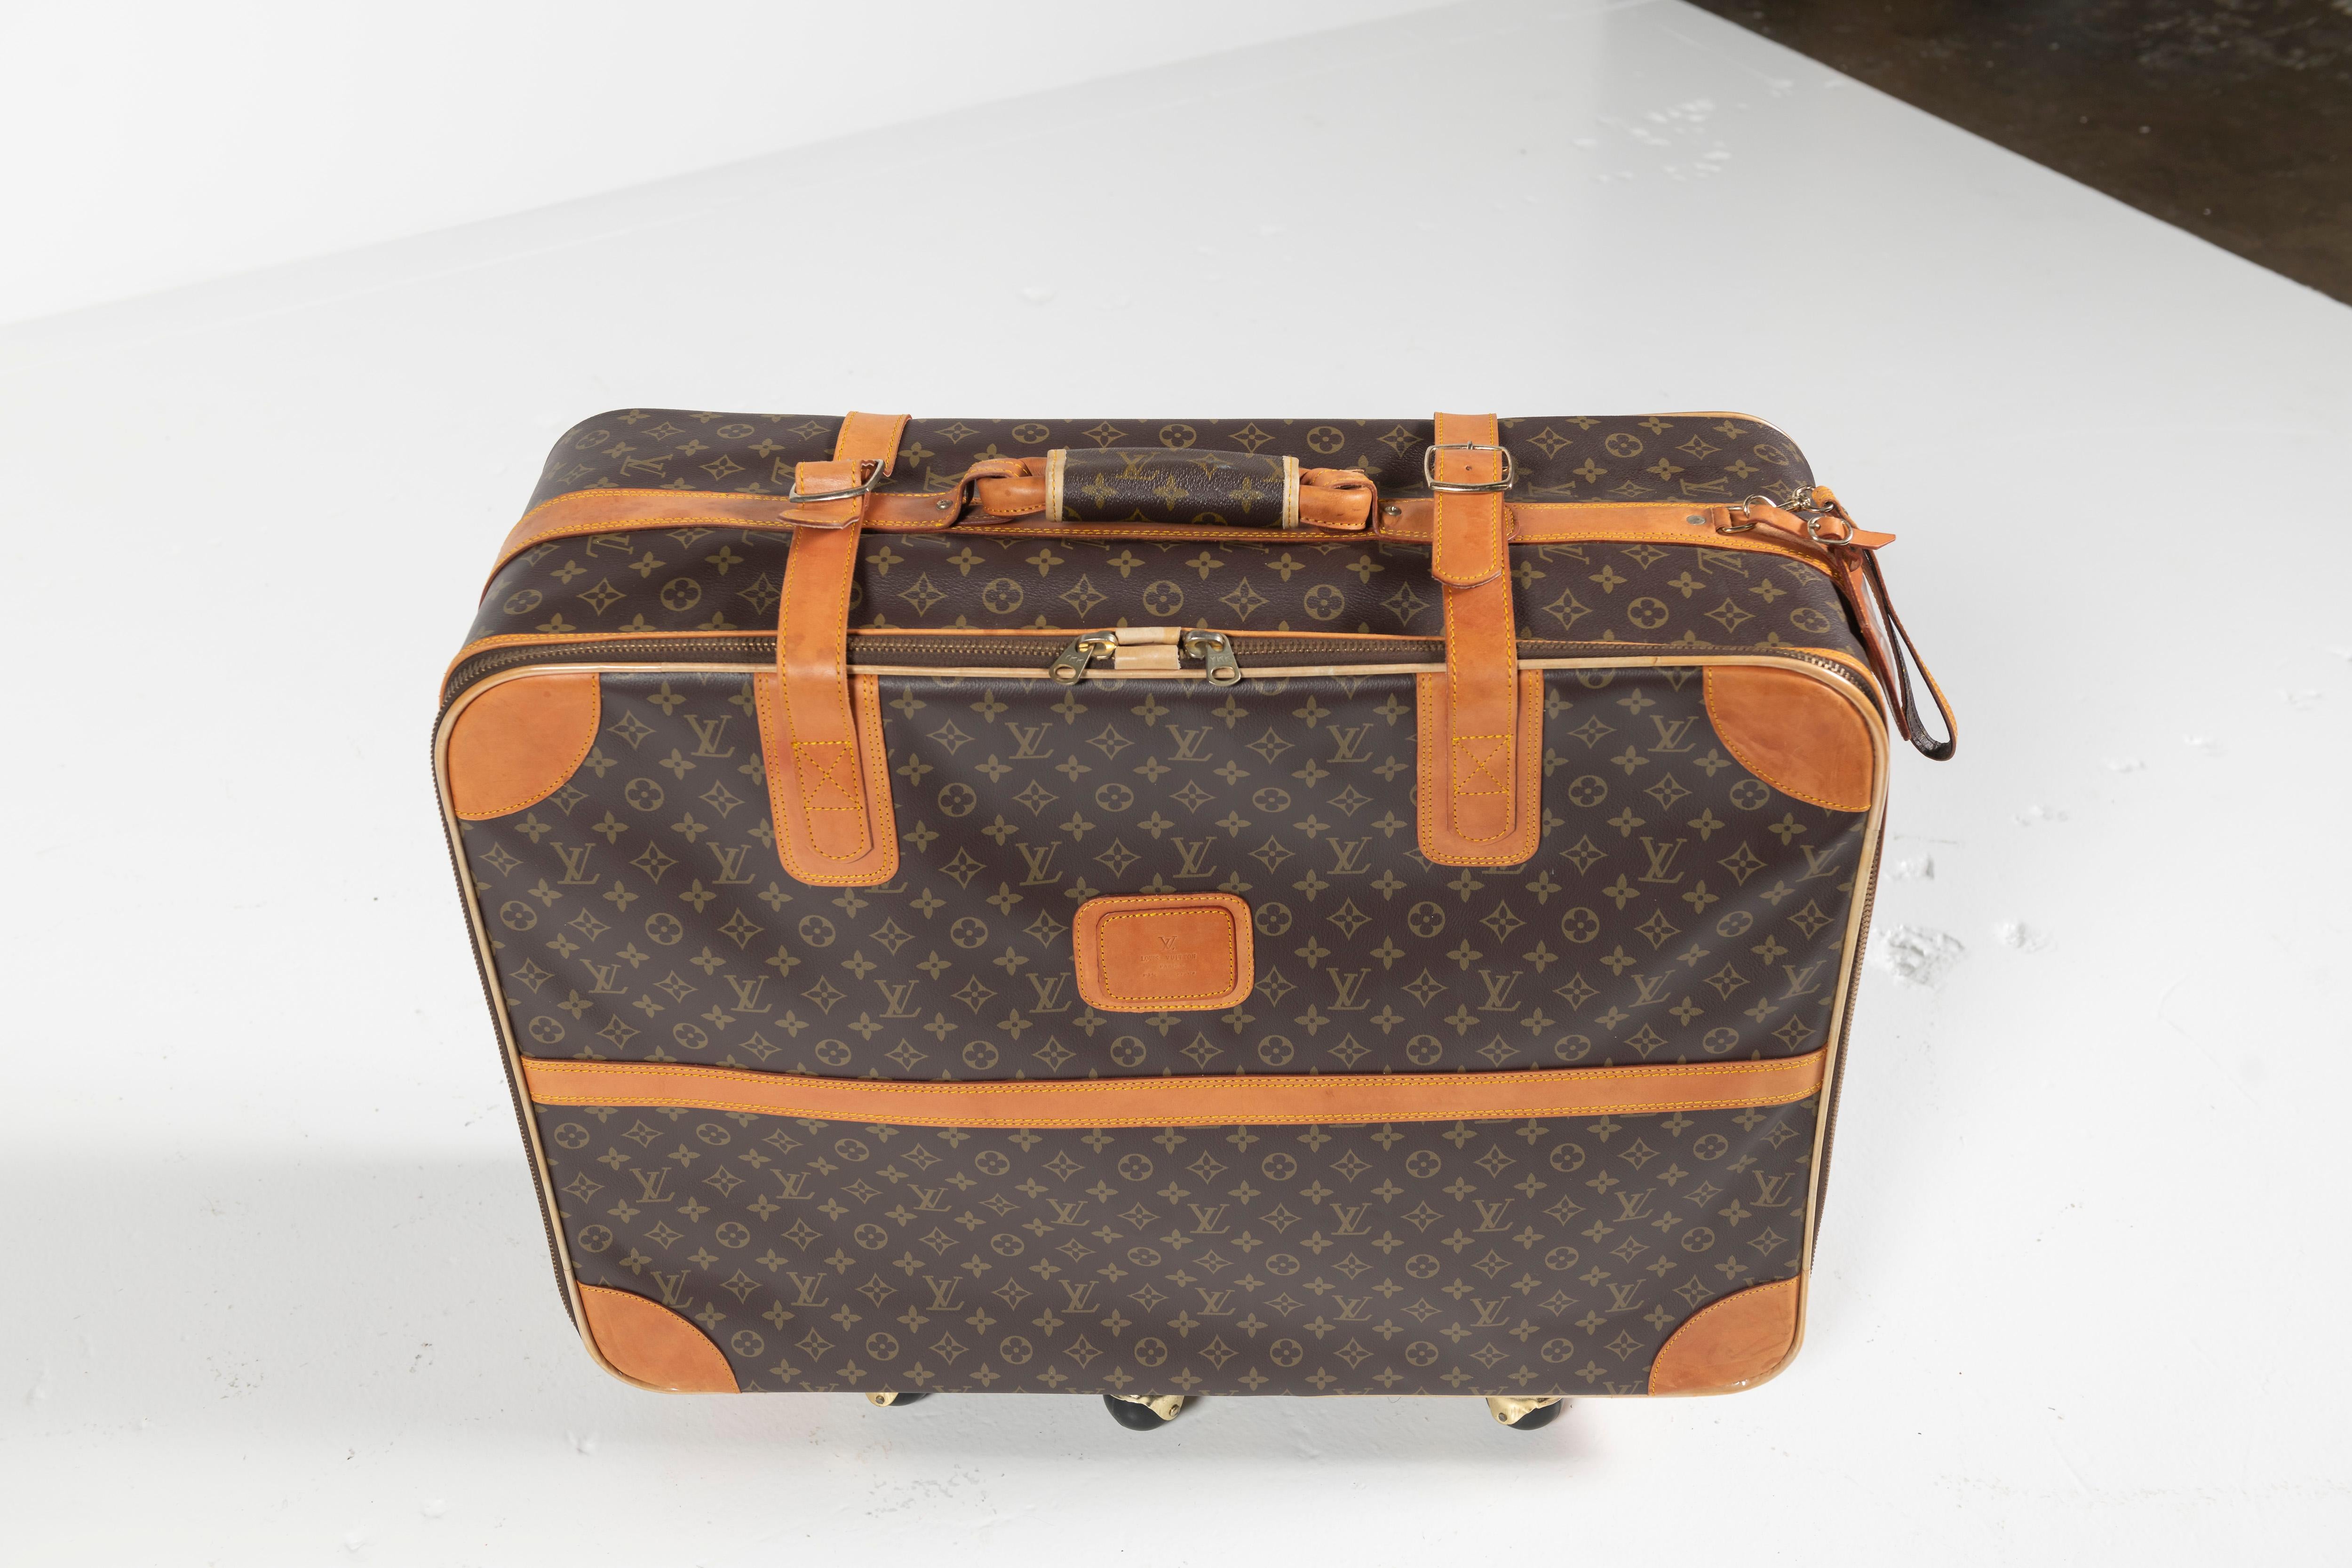 Vintage Louis Vuitton Suitcase, Monogrammed Coated Canvas, Medium-Sized In Good Condition For Sale In San Francisco, CA